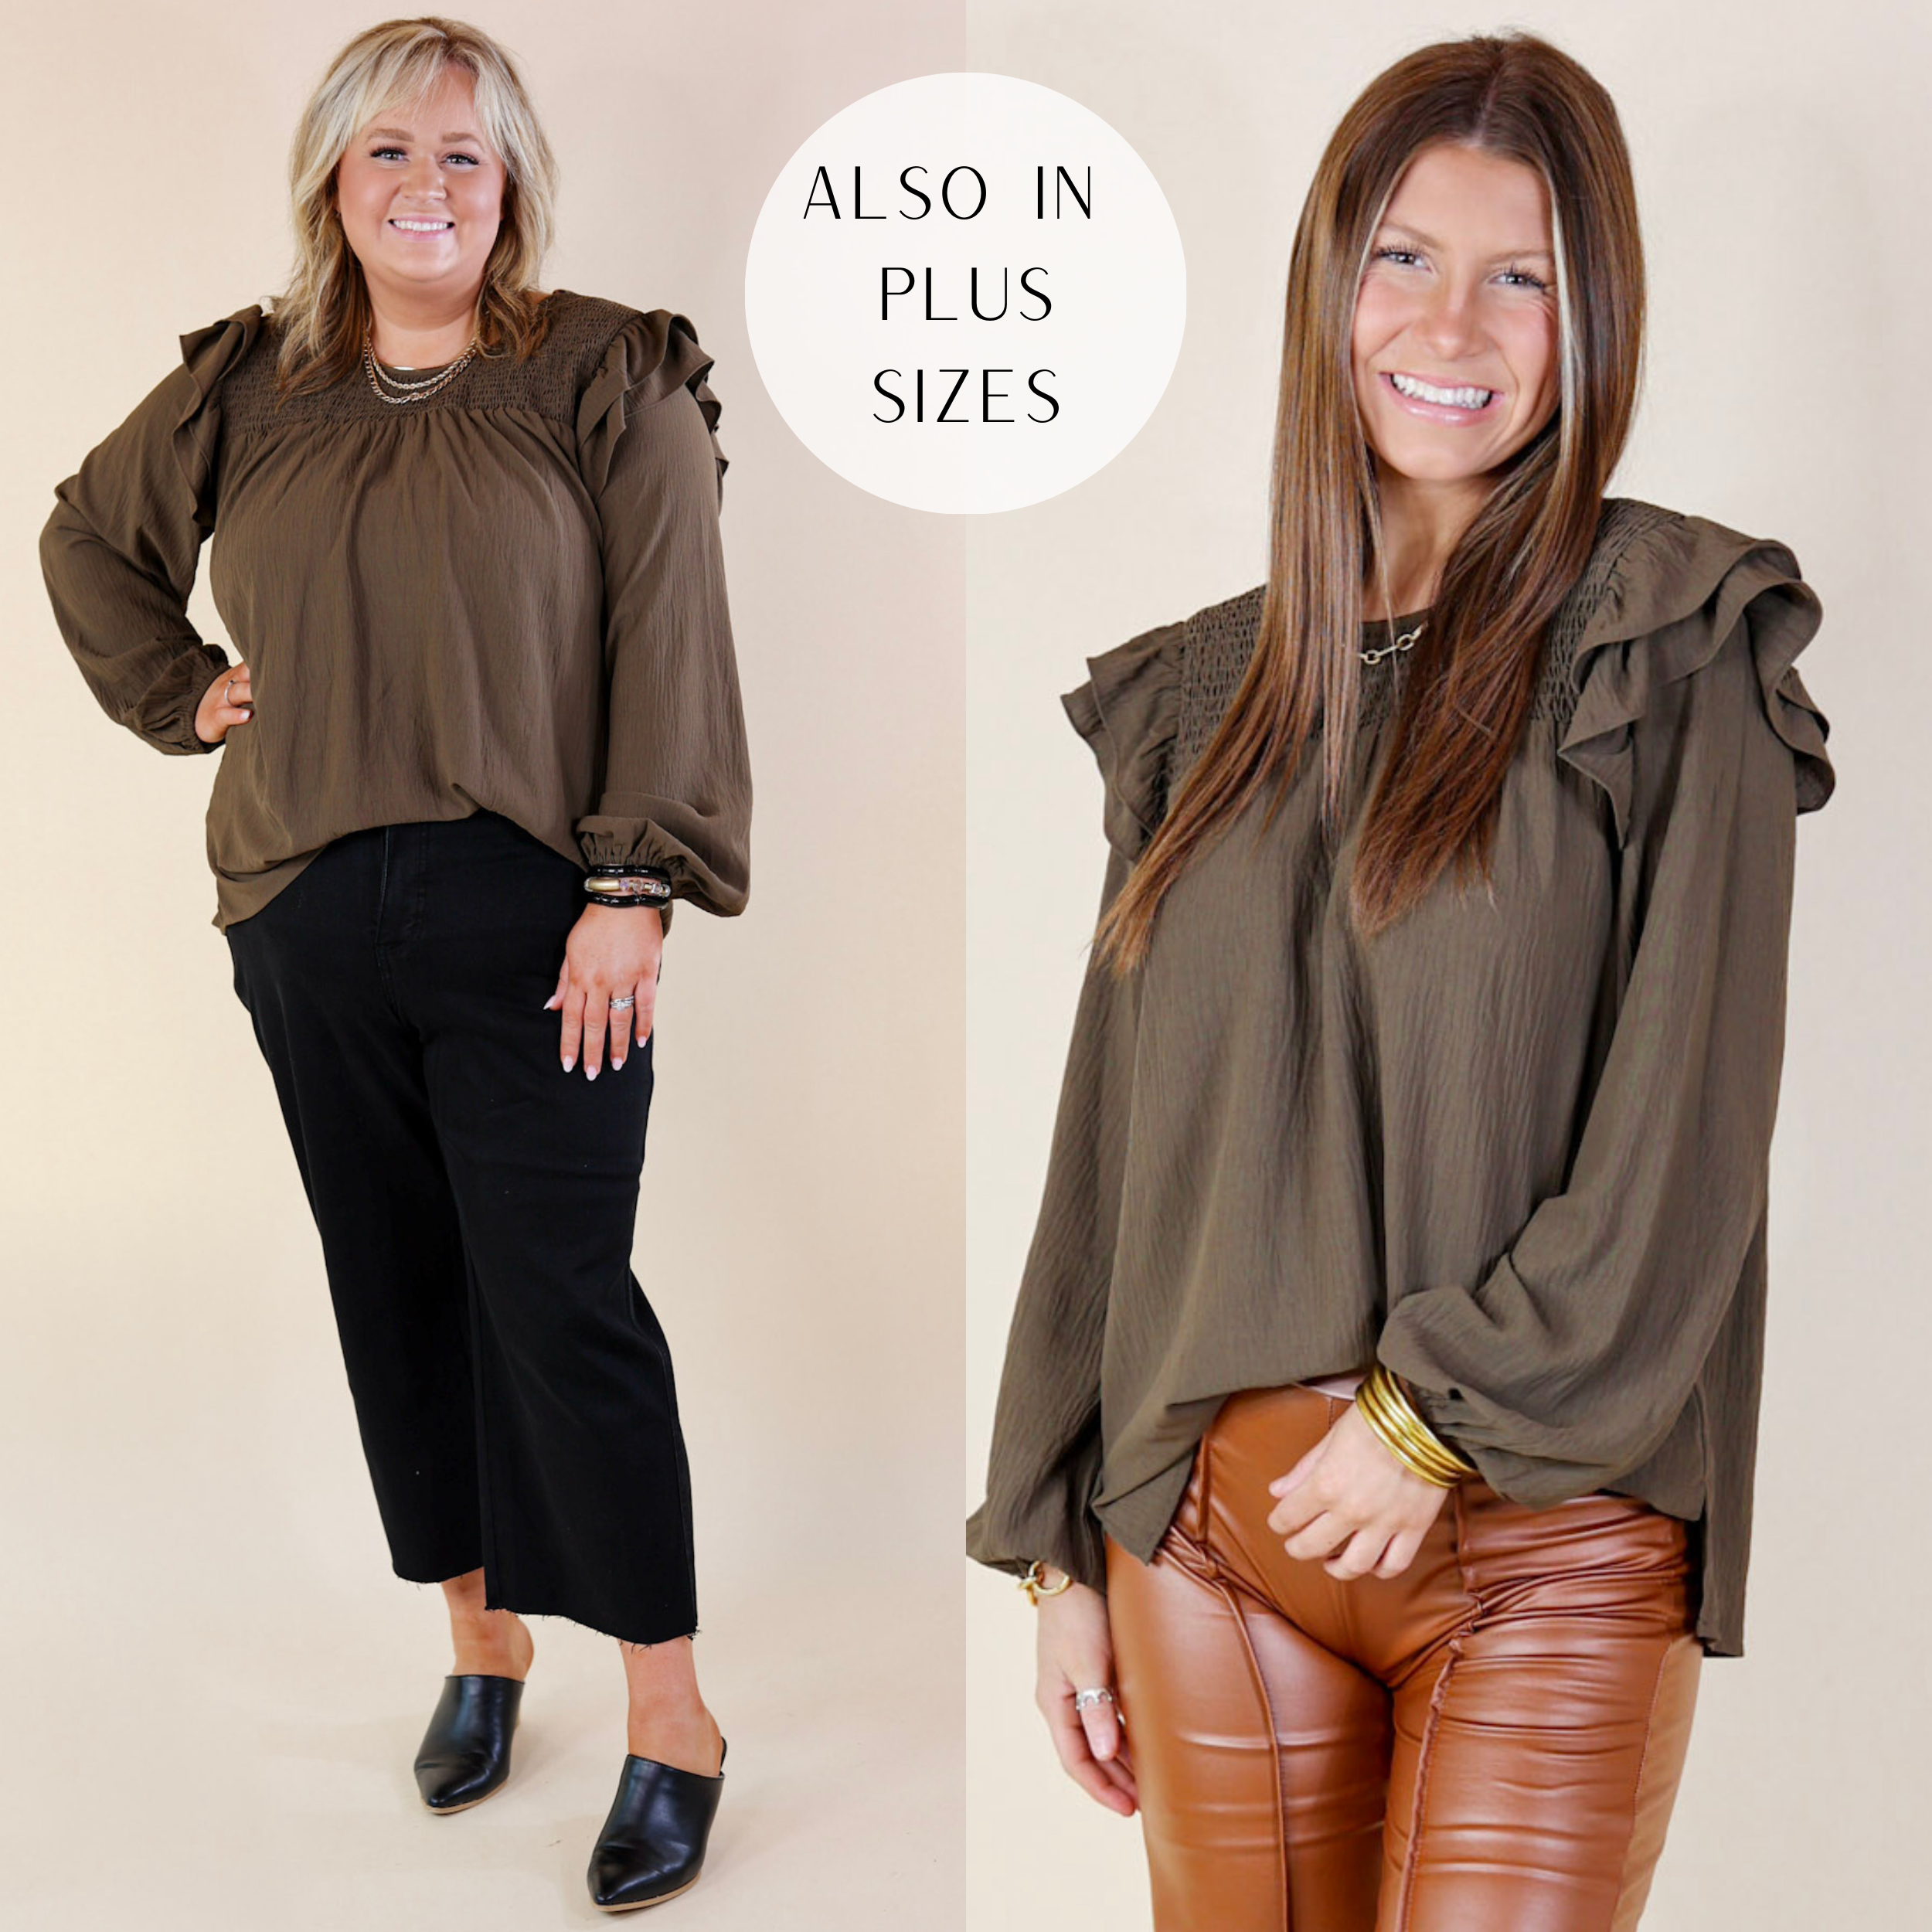 in the picture the model is wearing a ruffle shoulder long sleeve blouse in olive brown with a white background